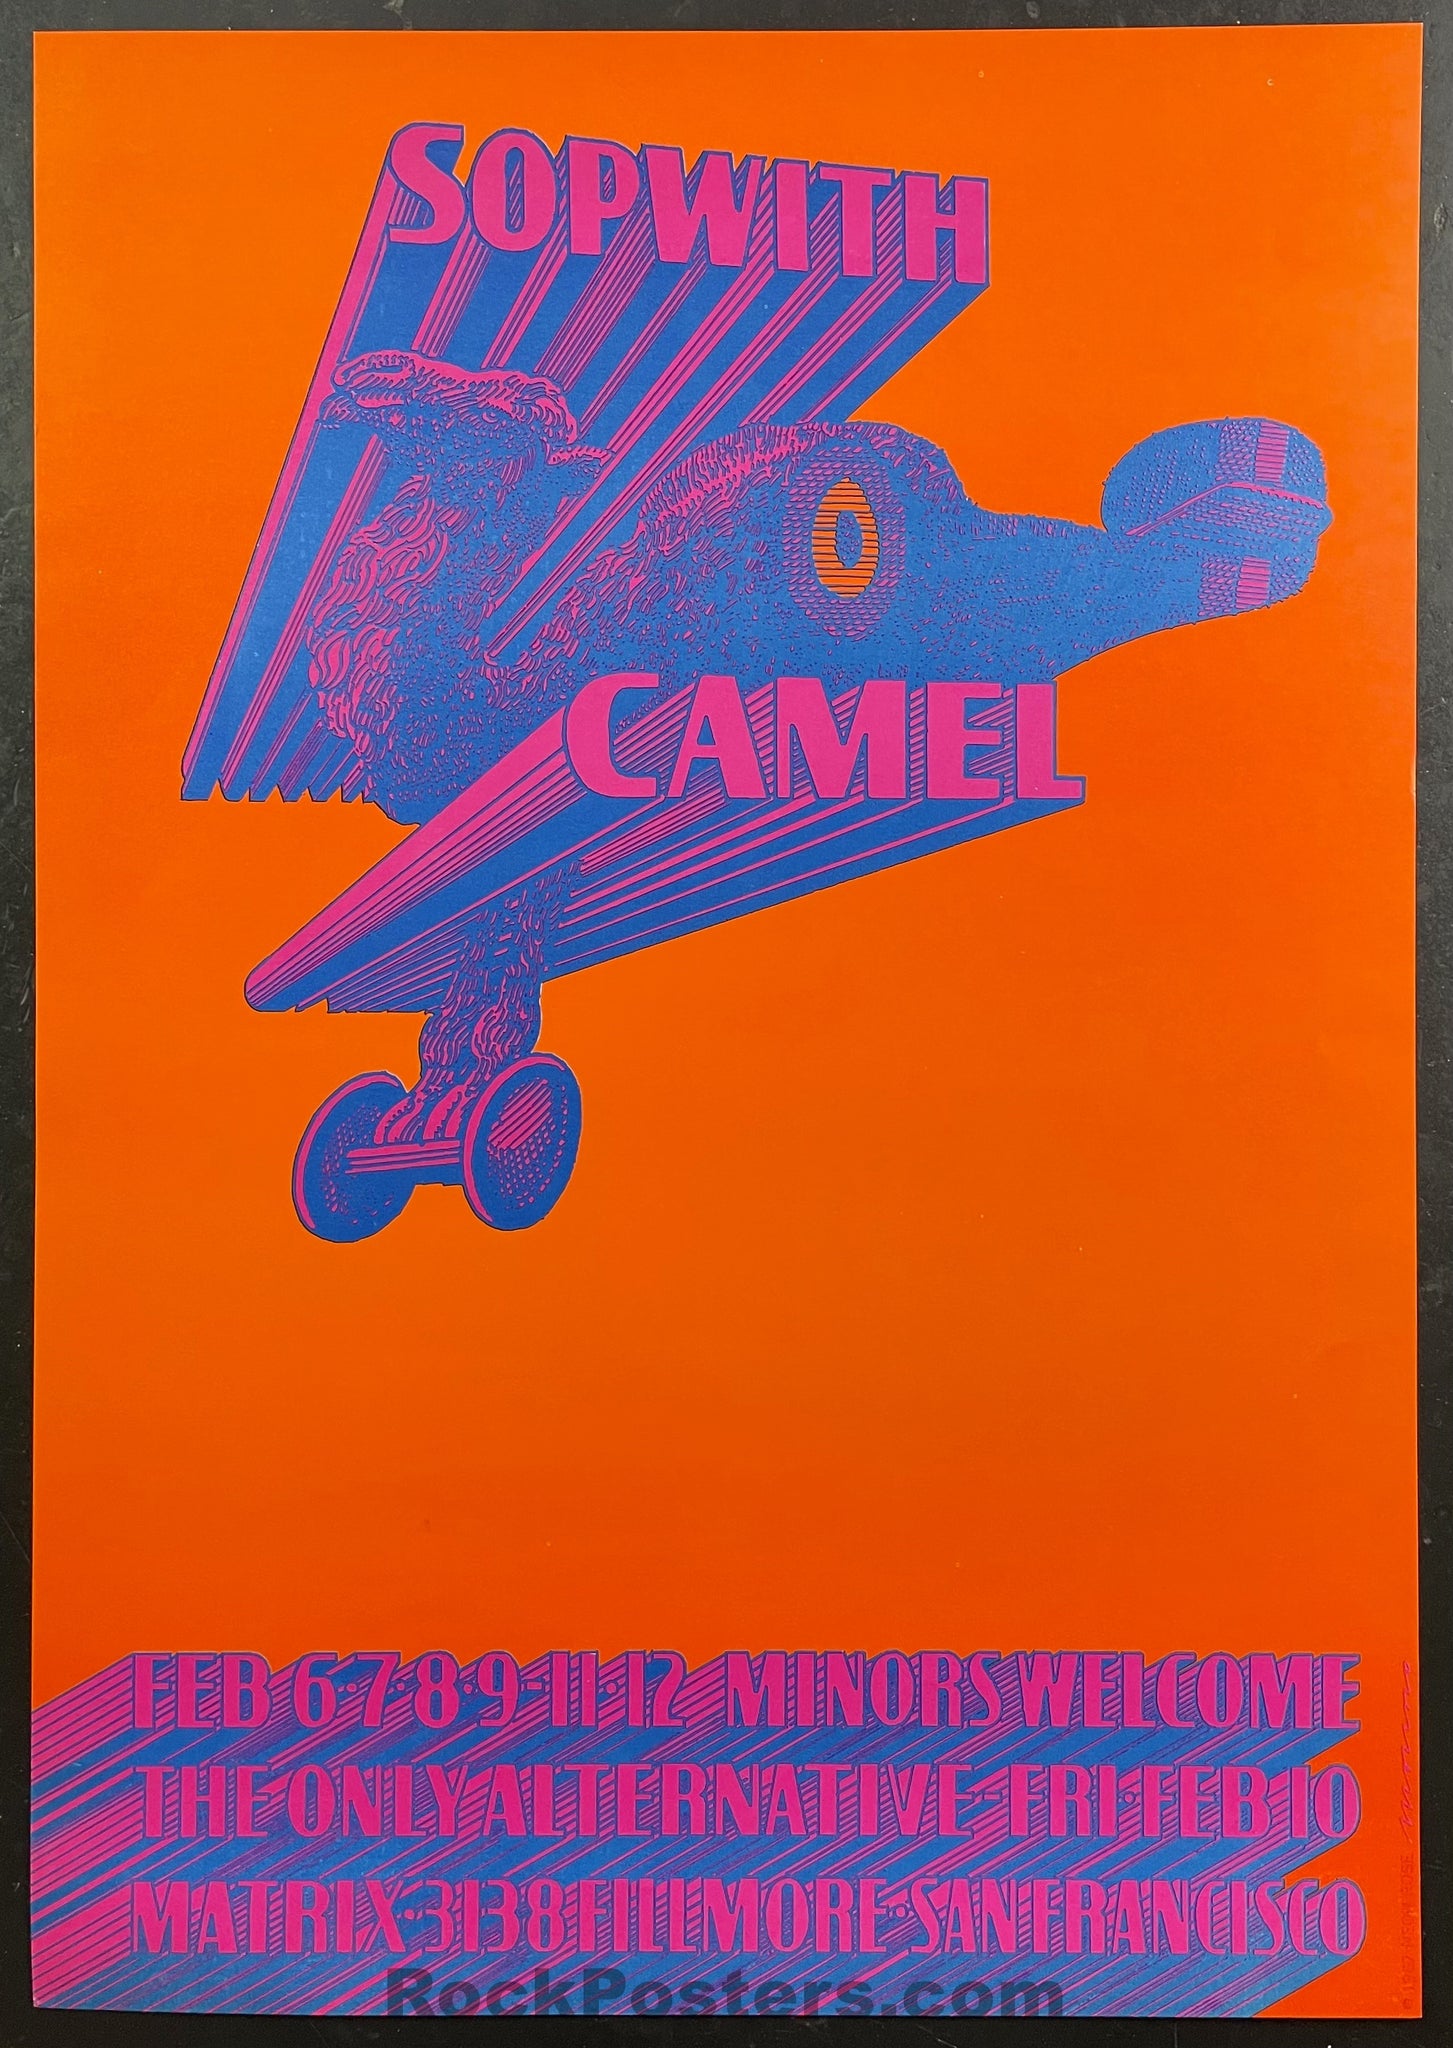 AUCTION - Neon Rose 5 - Sopwith Camel - 1968 Poster - The Matrix - Excellent